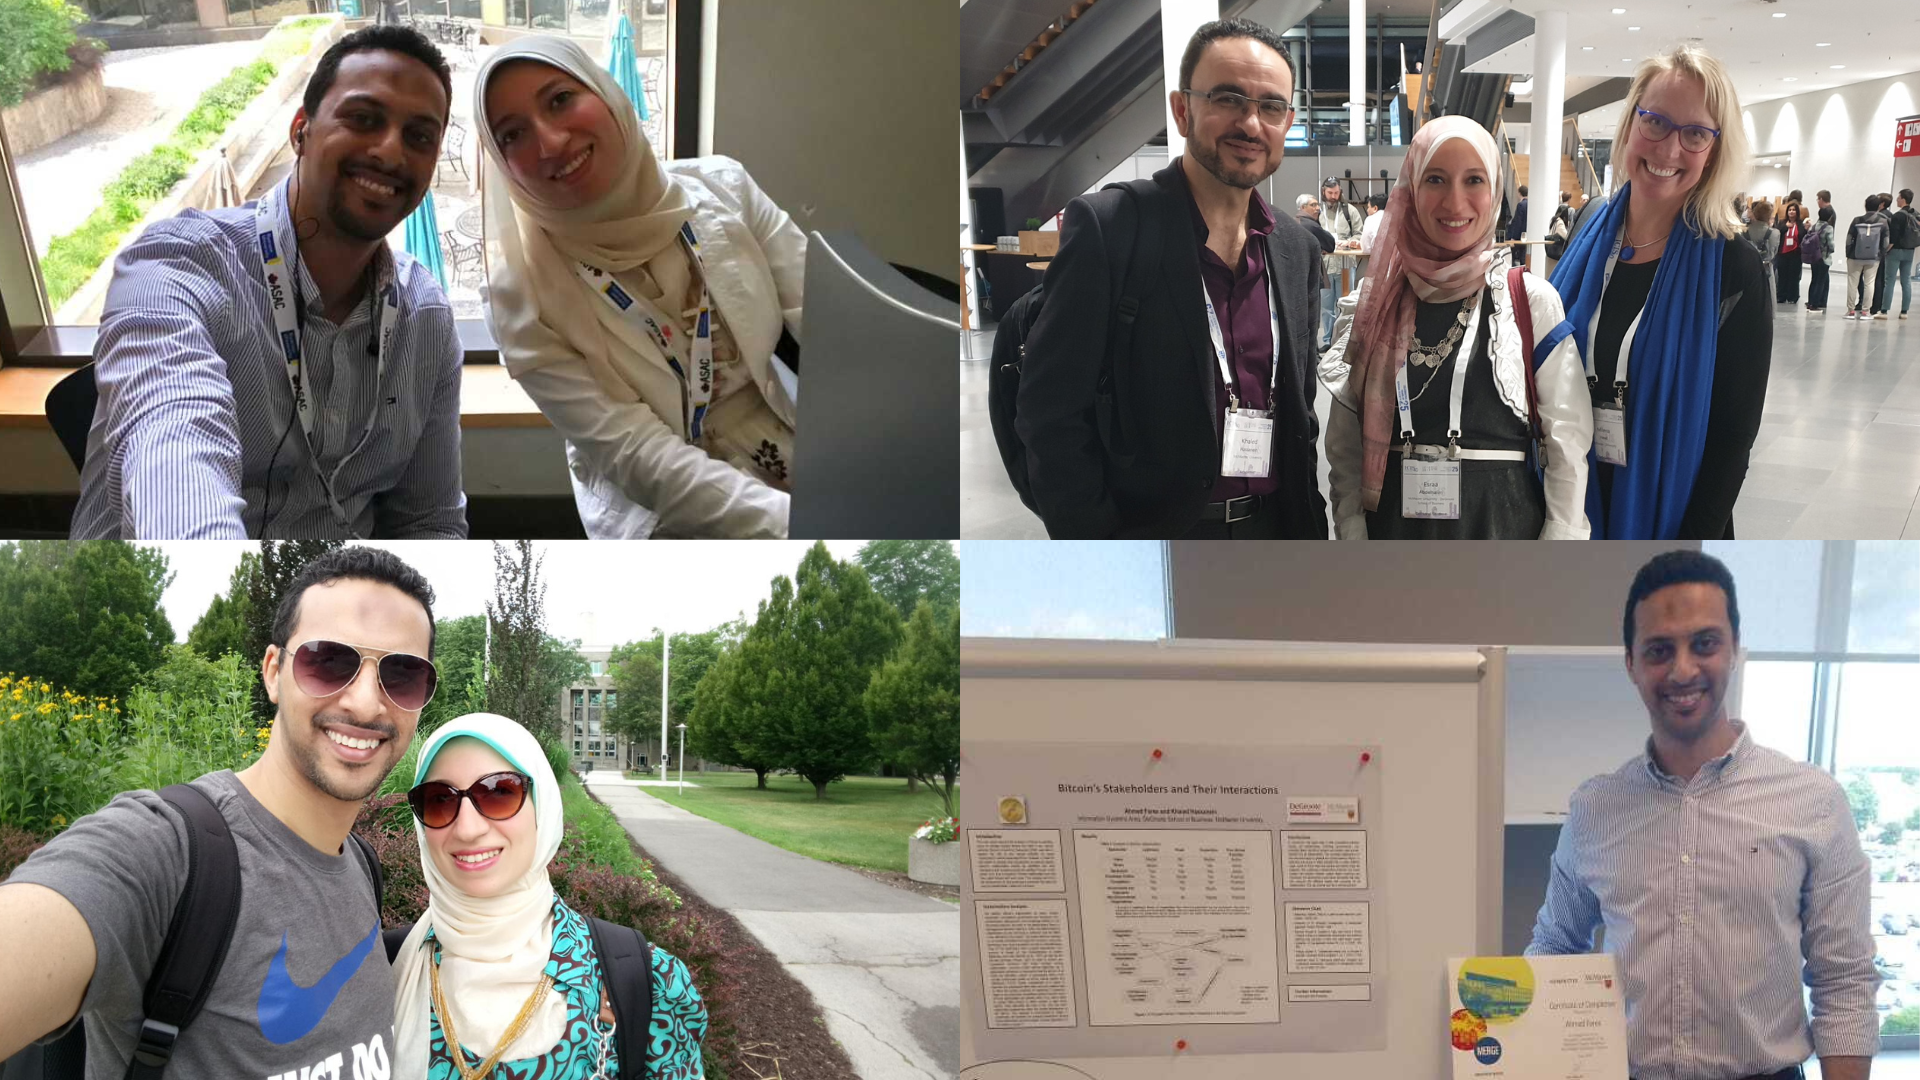 FOur photos in a grid. Two are selfies of Abdelhalim and Mohamadean. One is of Abdelhalim with Dean Khaled Hassanein and Professor Milena Head and the other is Mohamadean smiling while standing in front of a research poster.